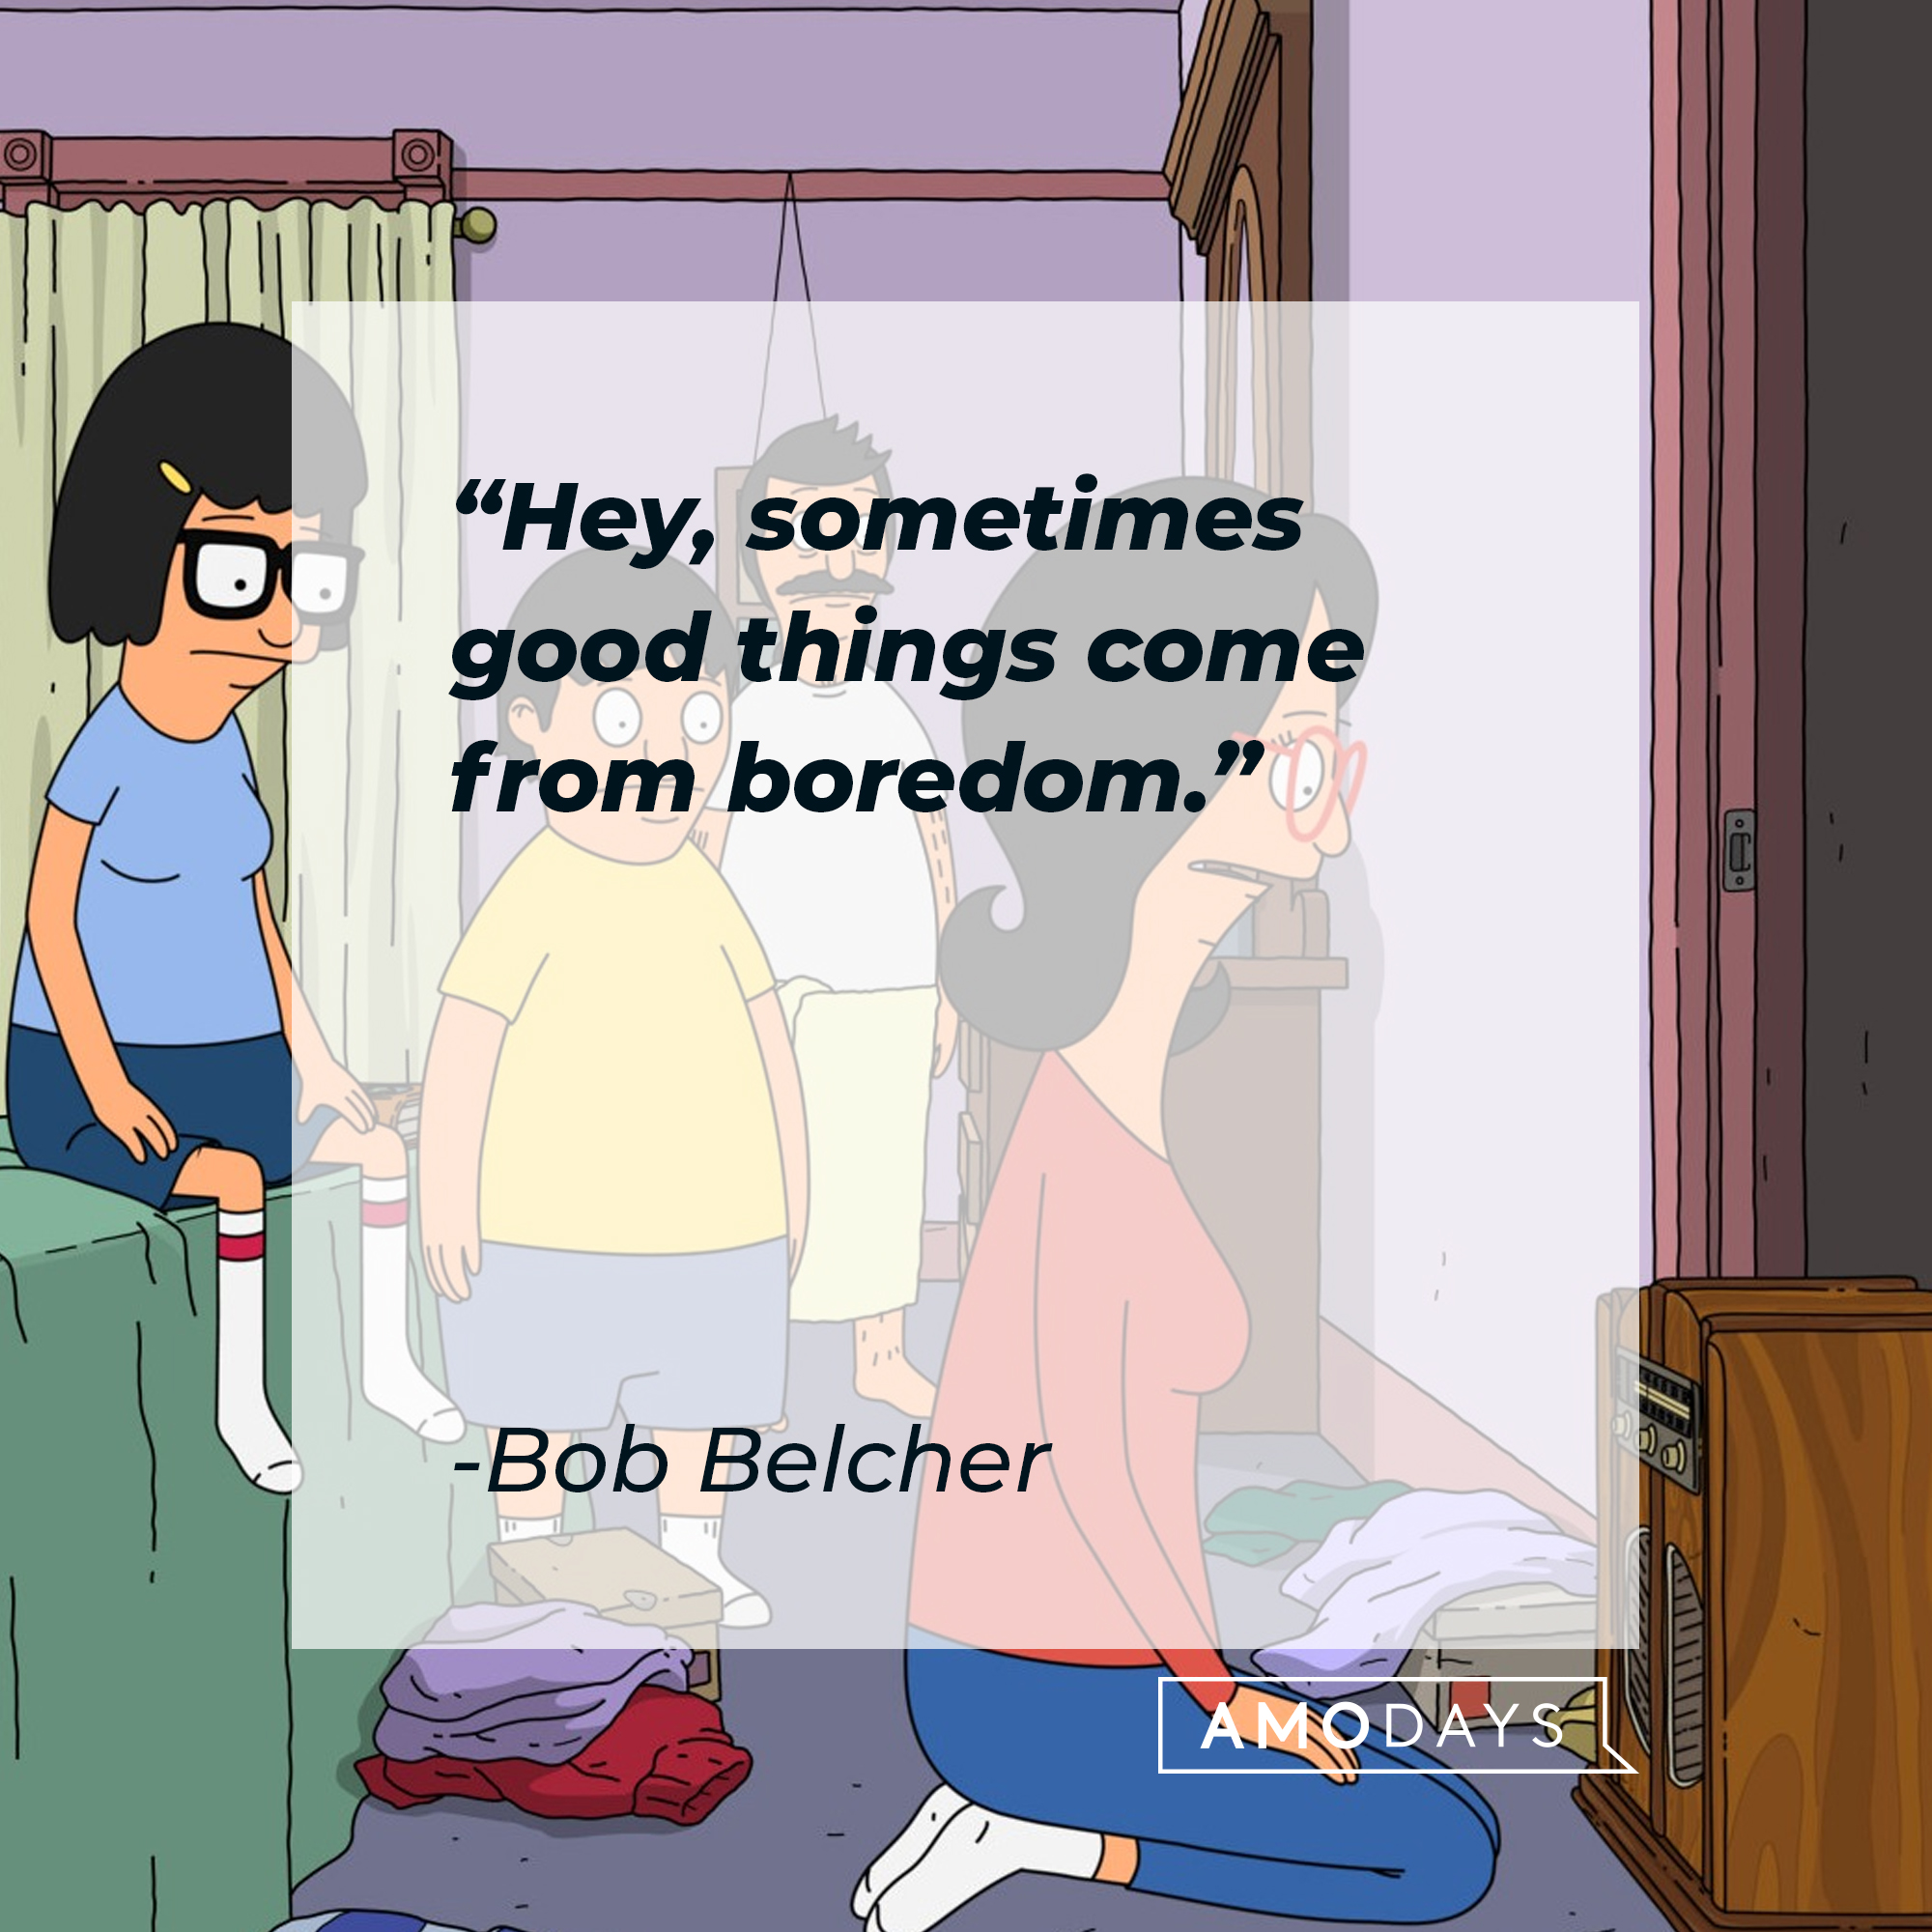 Bob Belcher's quote: “Hey, sometimes good things come from boredom.” | Source: facebook.com/BobsBurgers